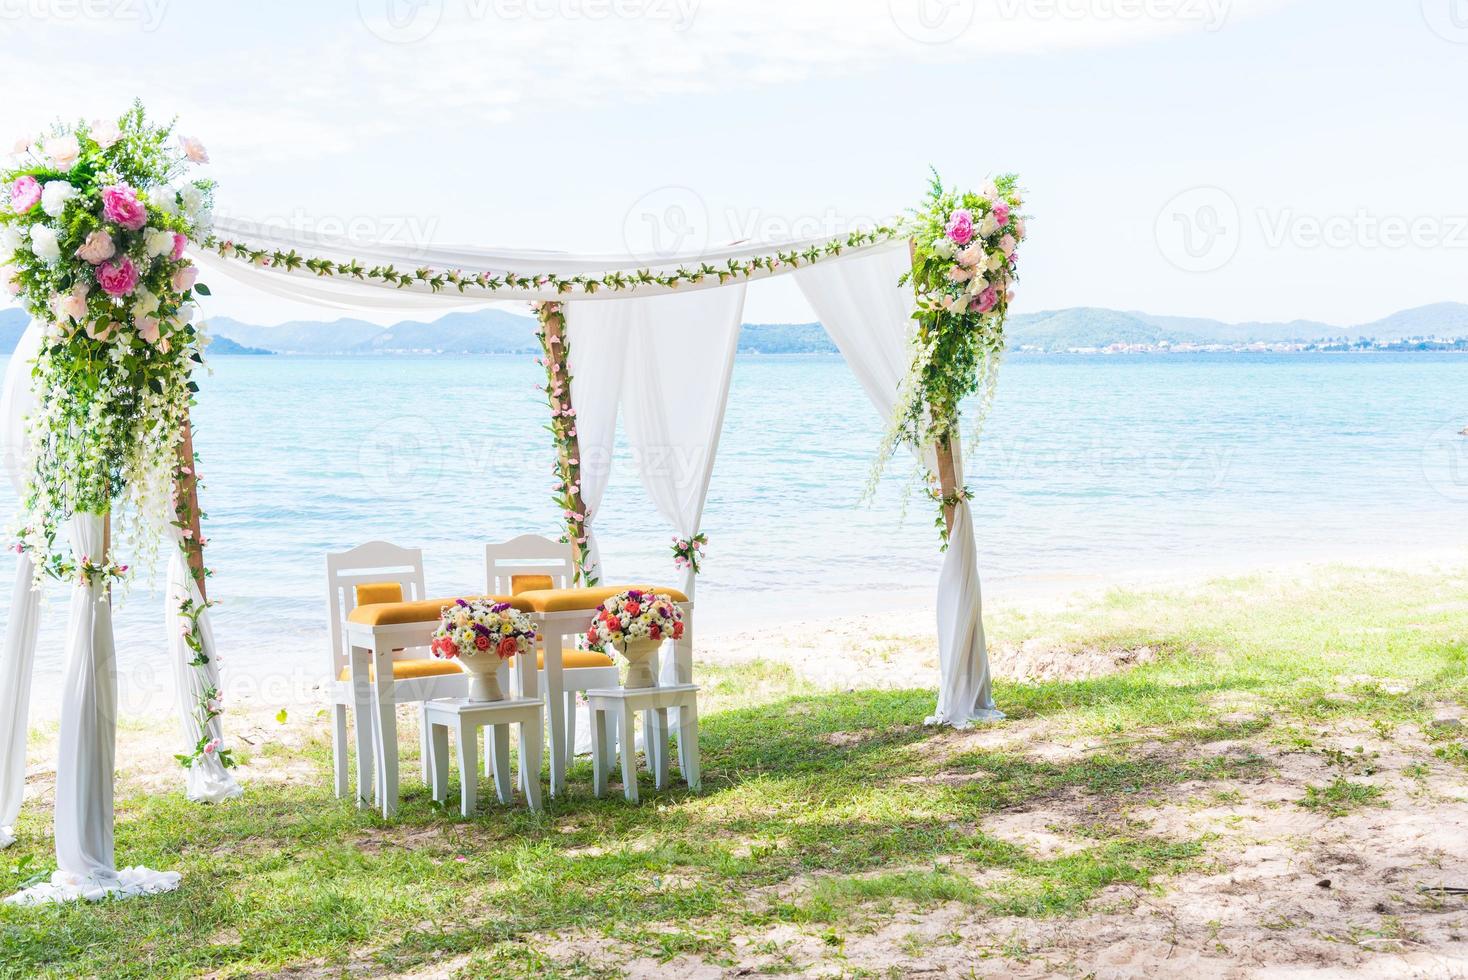 Beach Wedding Arch with copy space in right photo